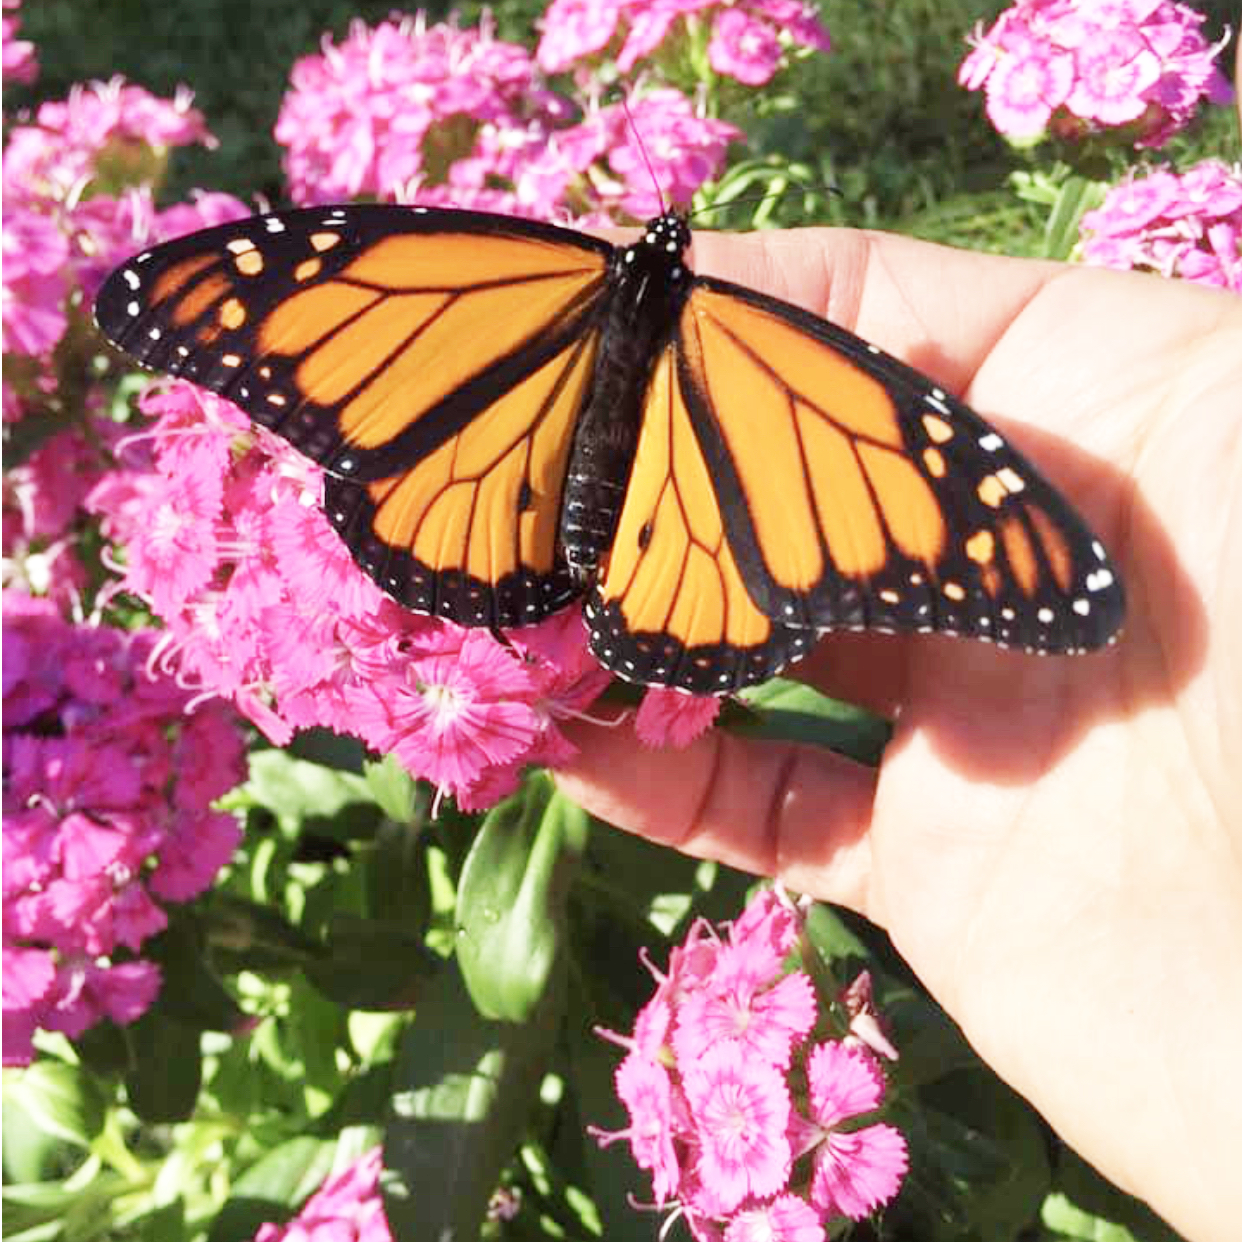 Patti Andrasak from Inner Peace Reiki teaches us how to help monarch butterflies on the For Animals For Earth Podcast.